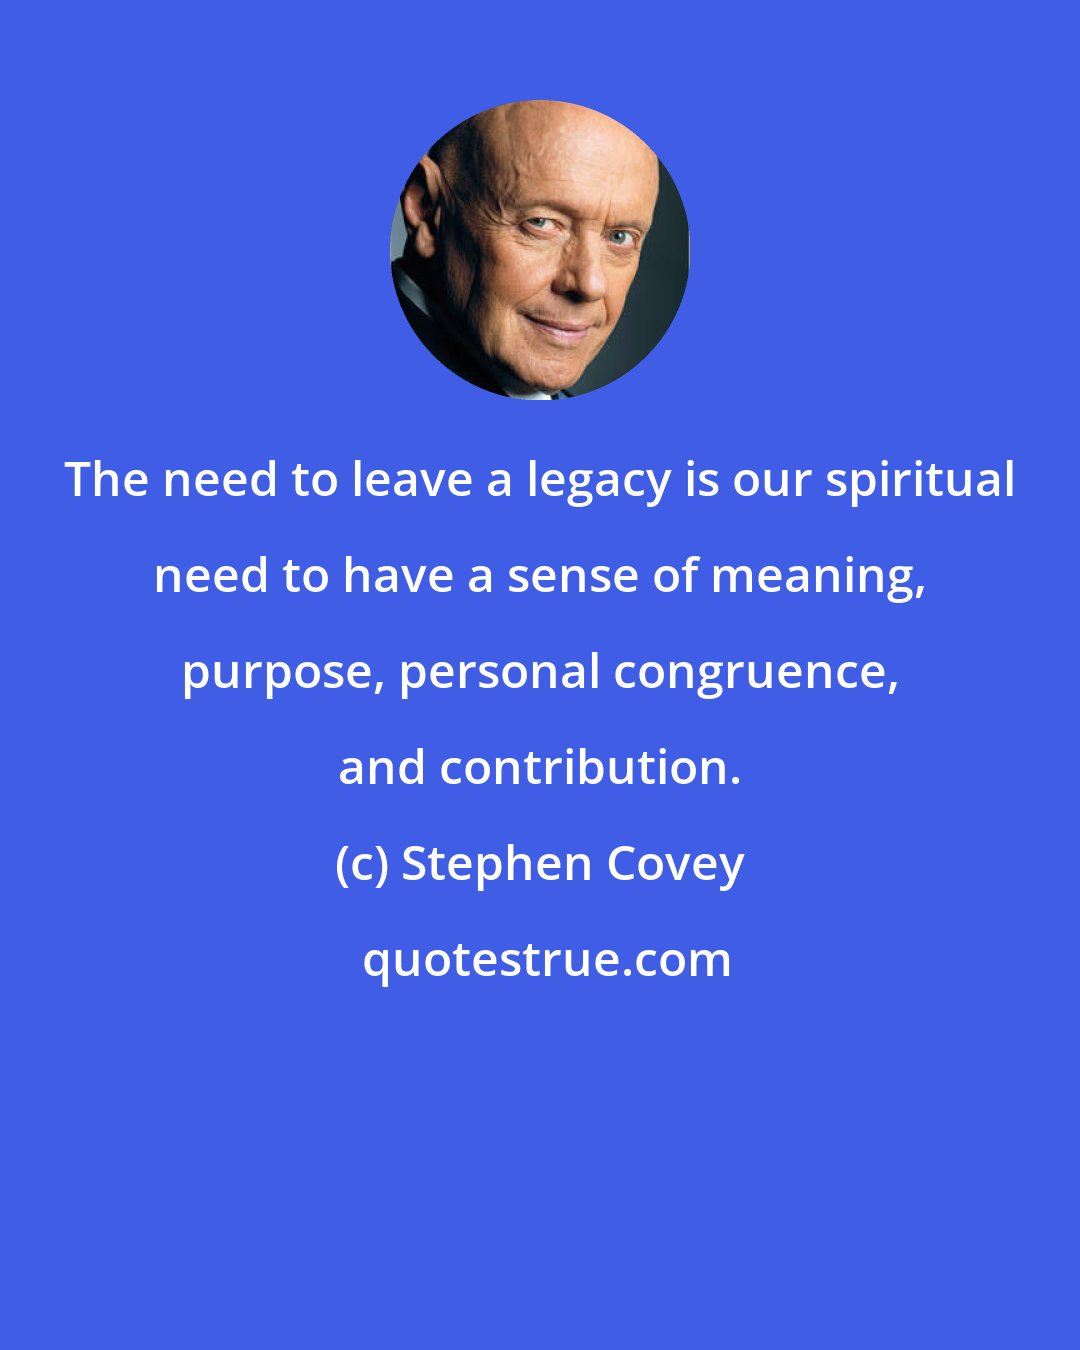 Stephen Covey: The need to leave a legacy is our spiritual need to have a sense of meaning, purpose, personal congruence, and contribution.